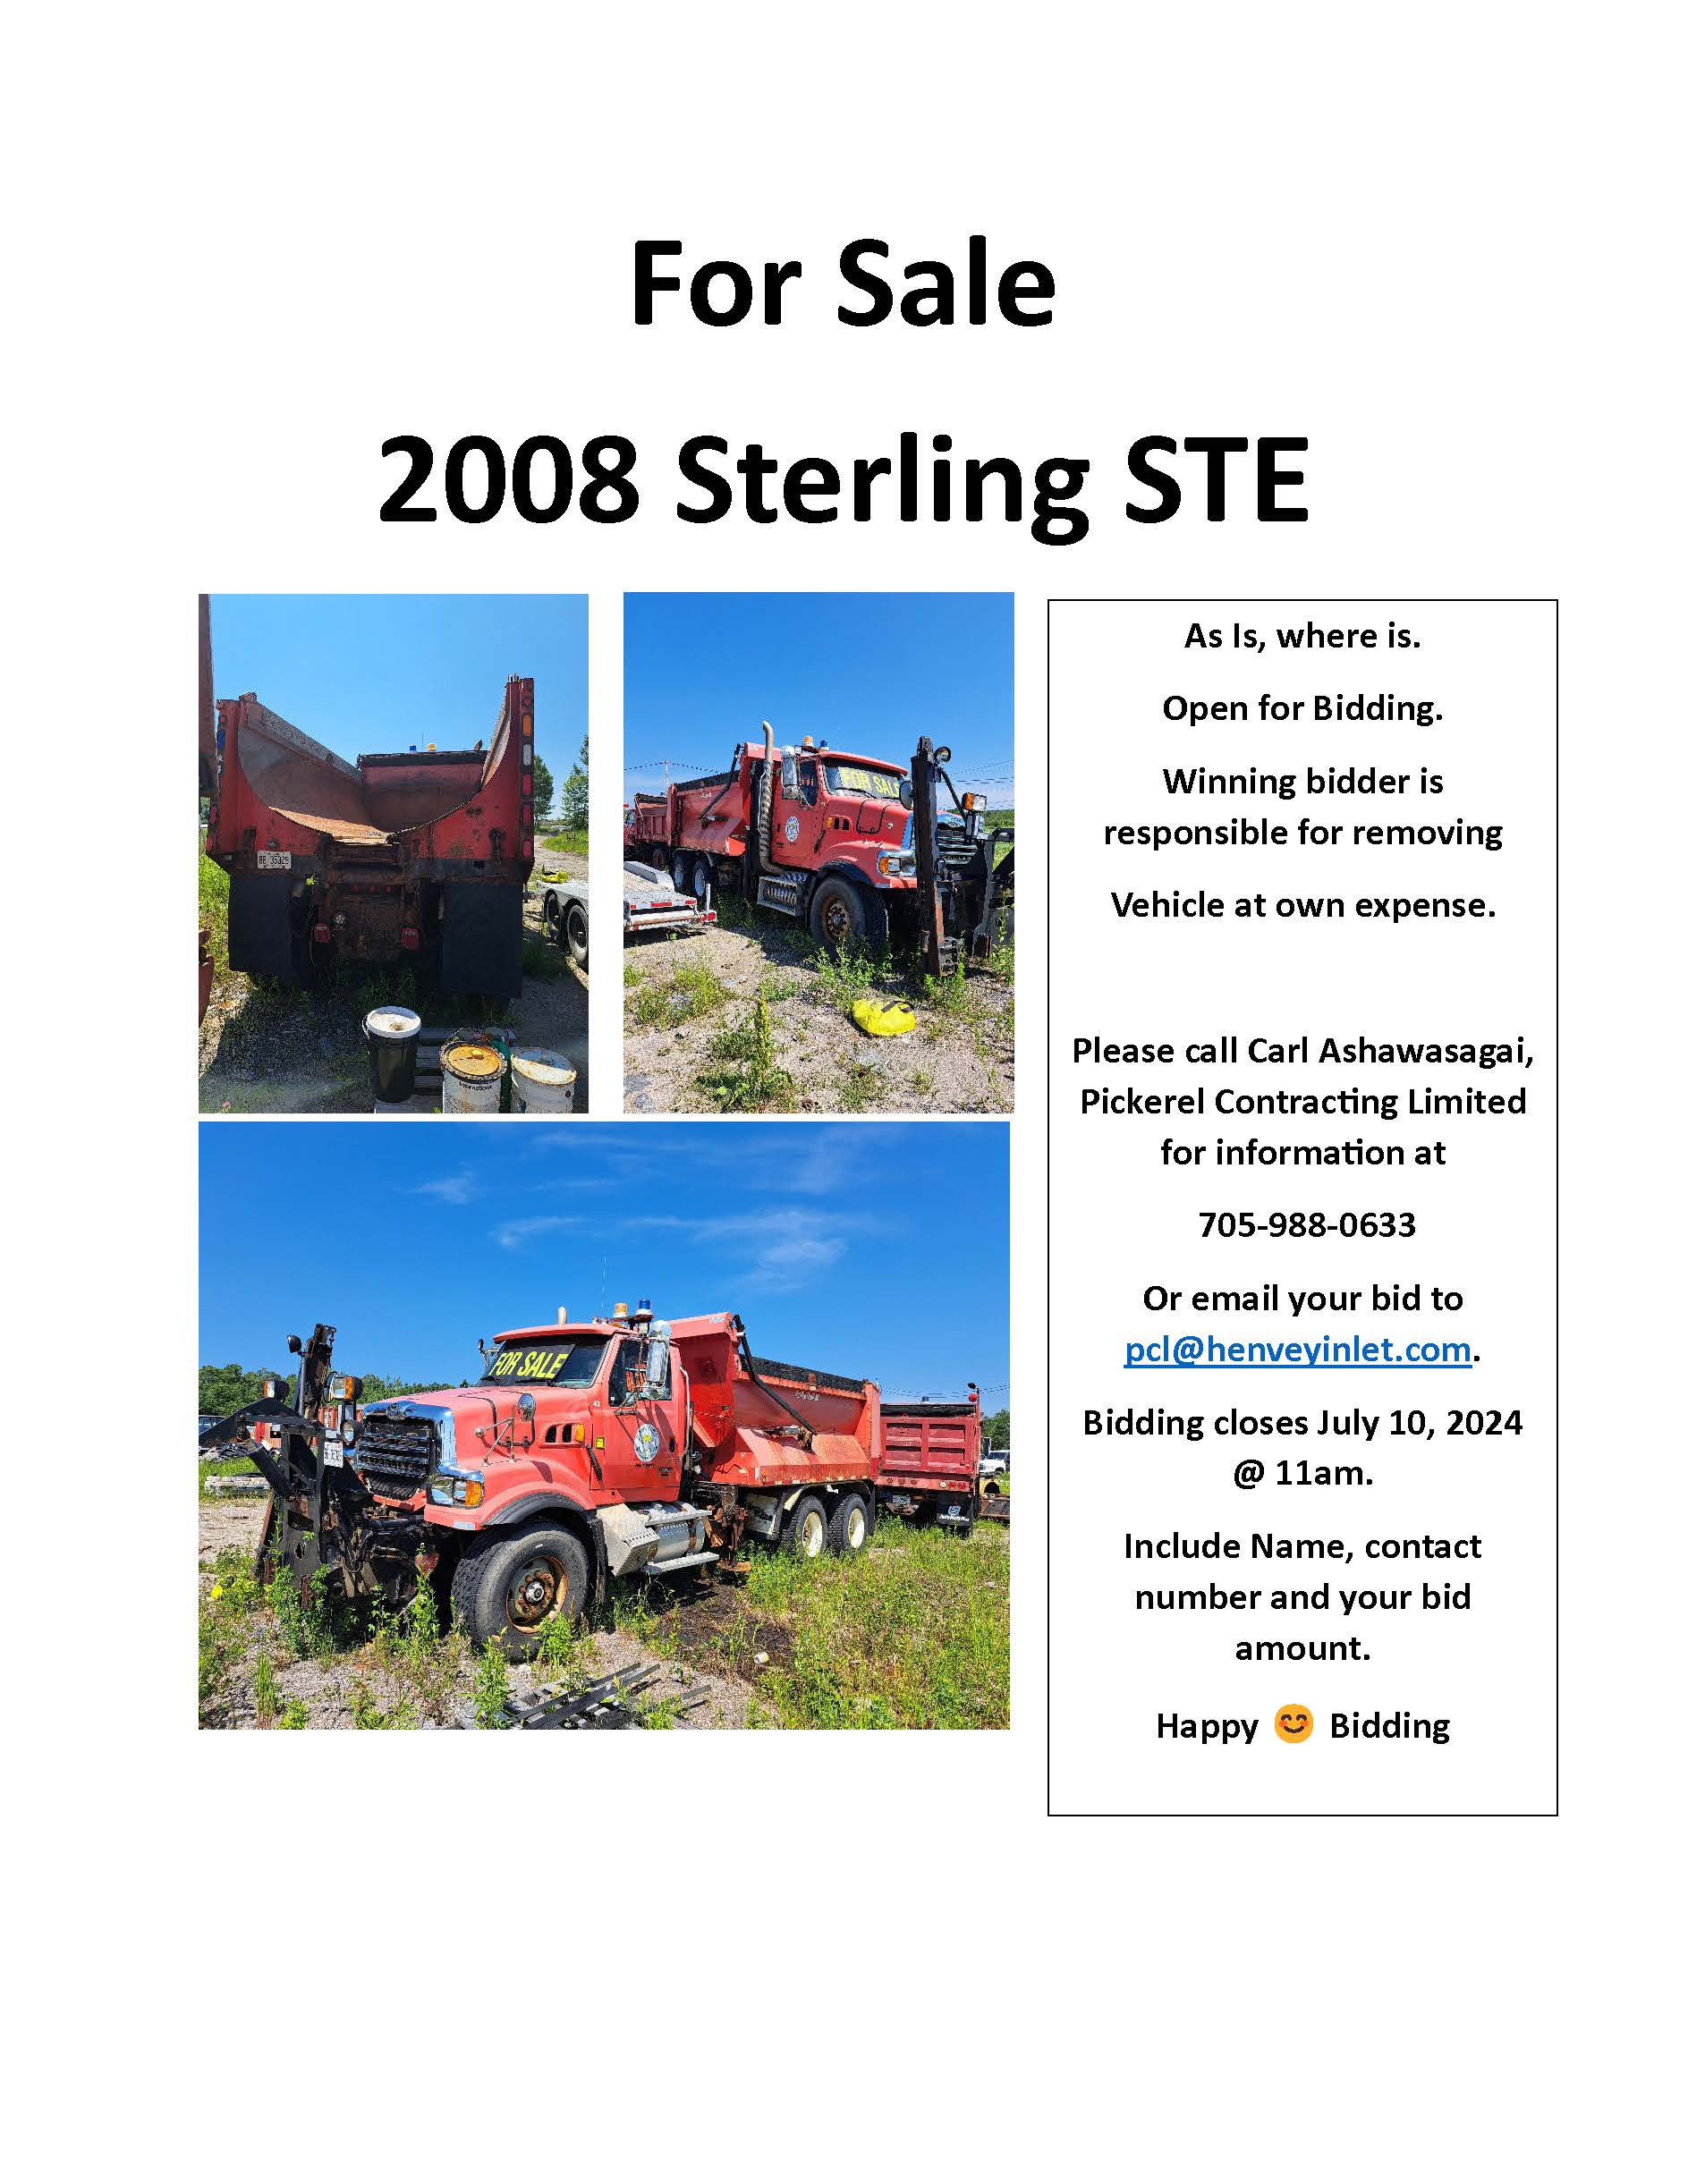 For Sale 2008 Sterling